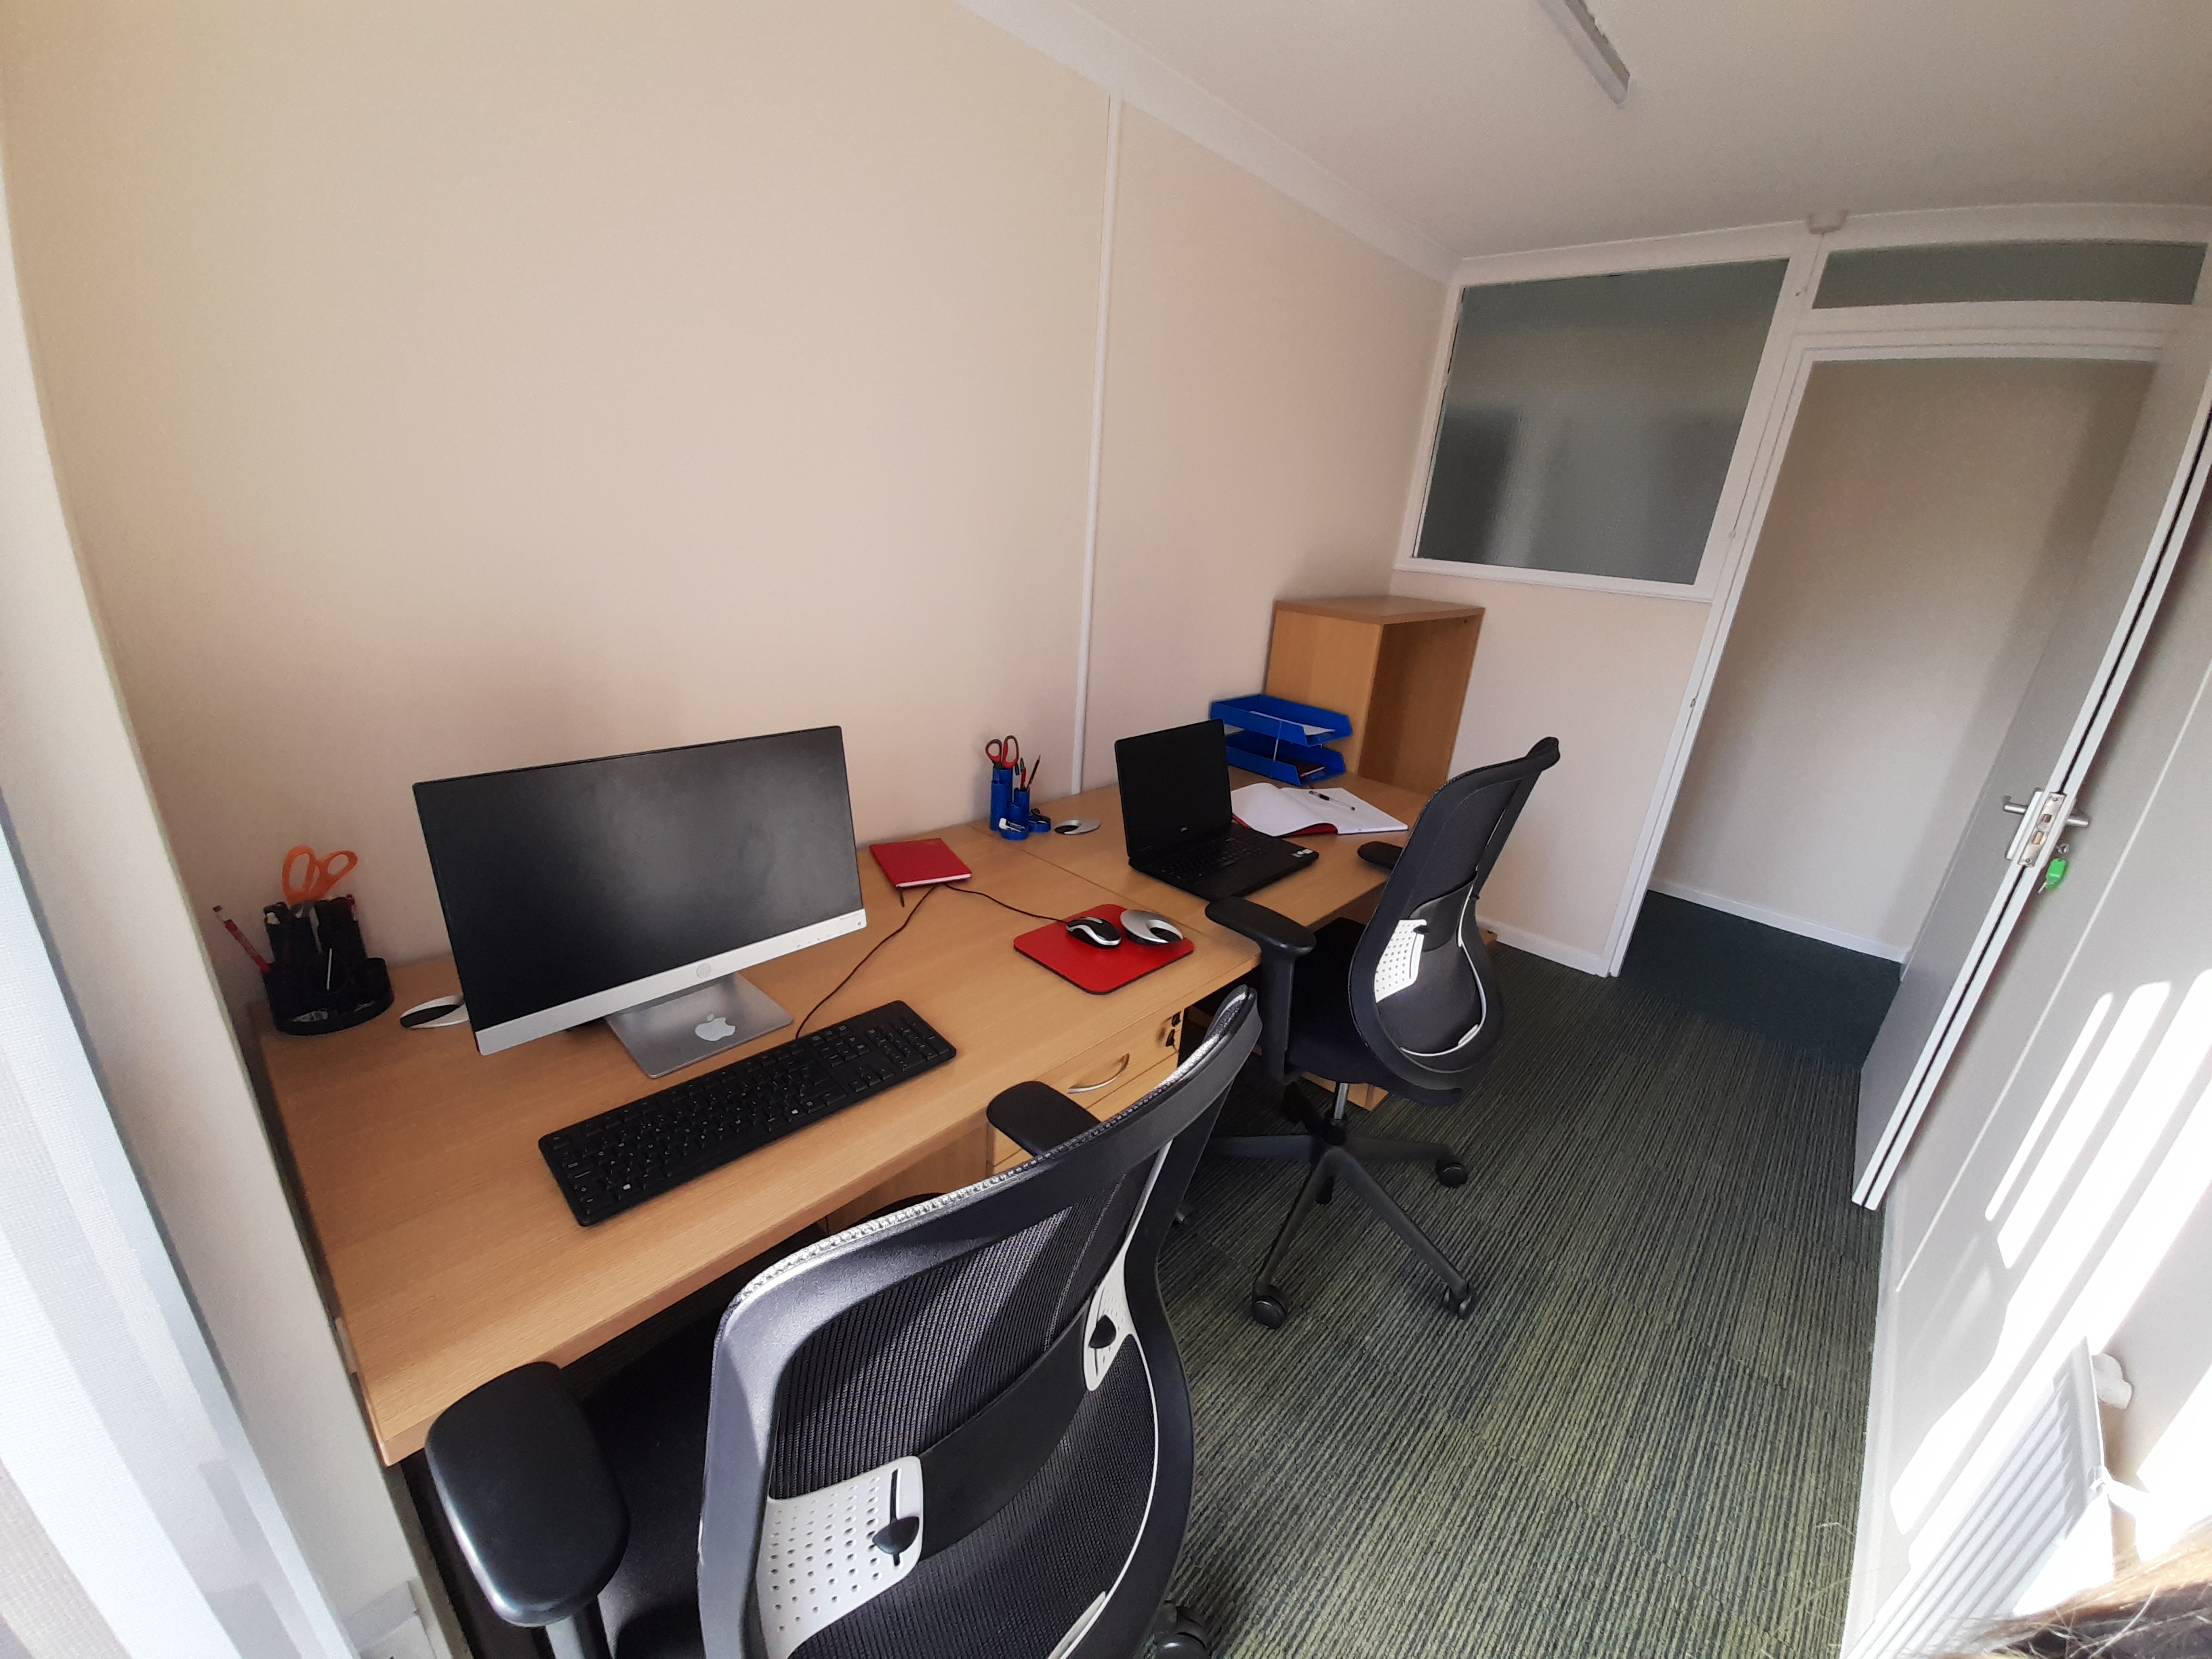 Huxley Hub, Huxley House, Huxley House Plympton, Huxley House Plymouth, Easy in easy out offices, Office Rental Plymouth, Huxley House your flexible business space, Office Rental Plymouth, Office Rental Plympton, 2 person office to rent, Office to rent in Plymouth